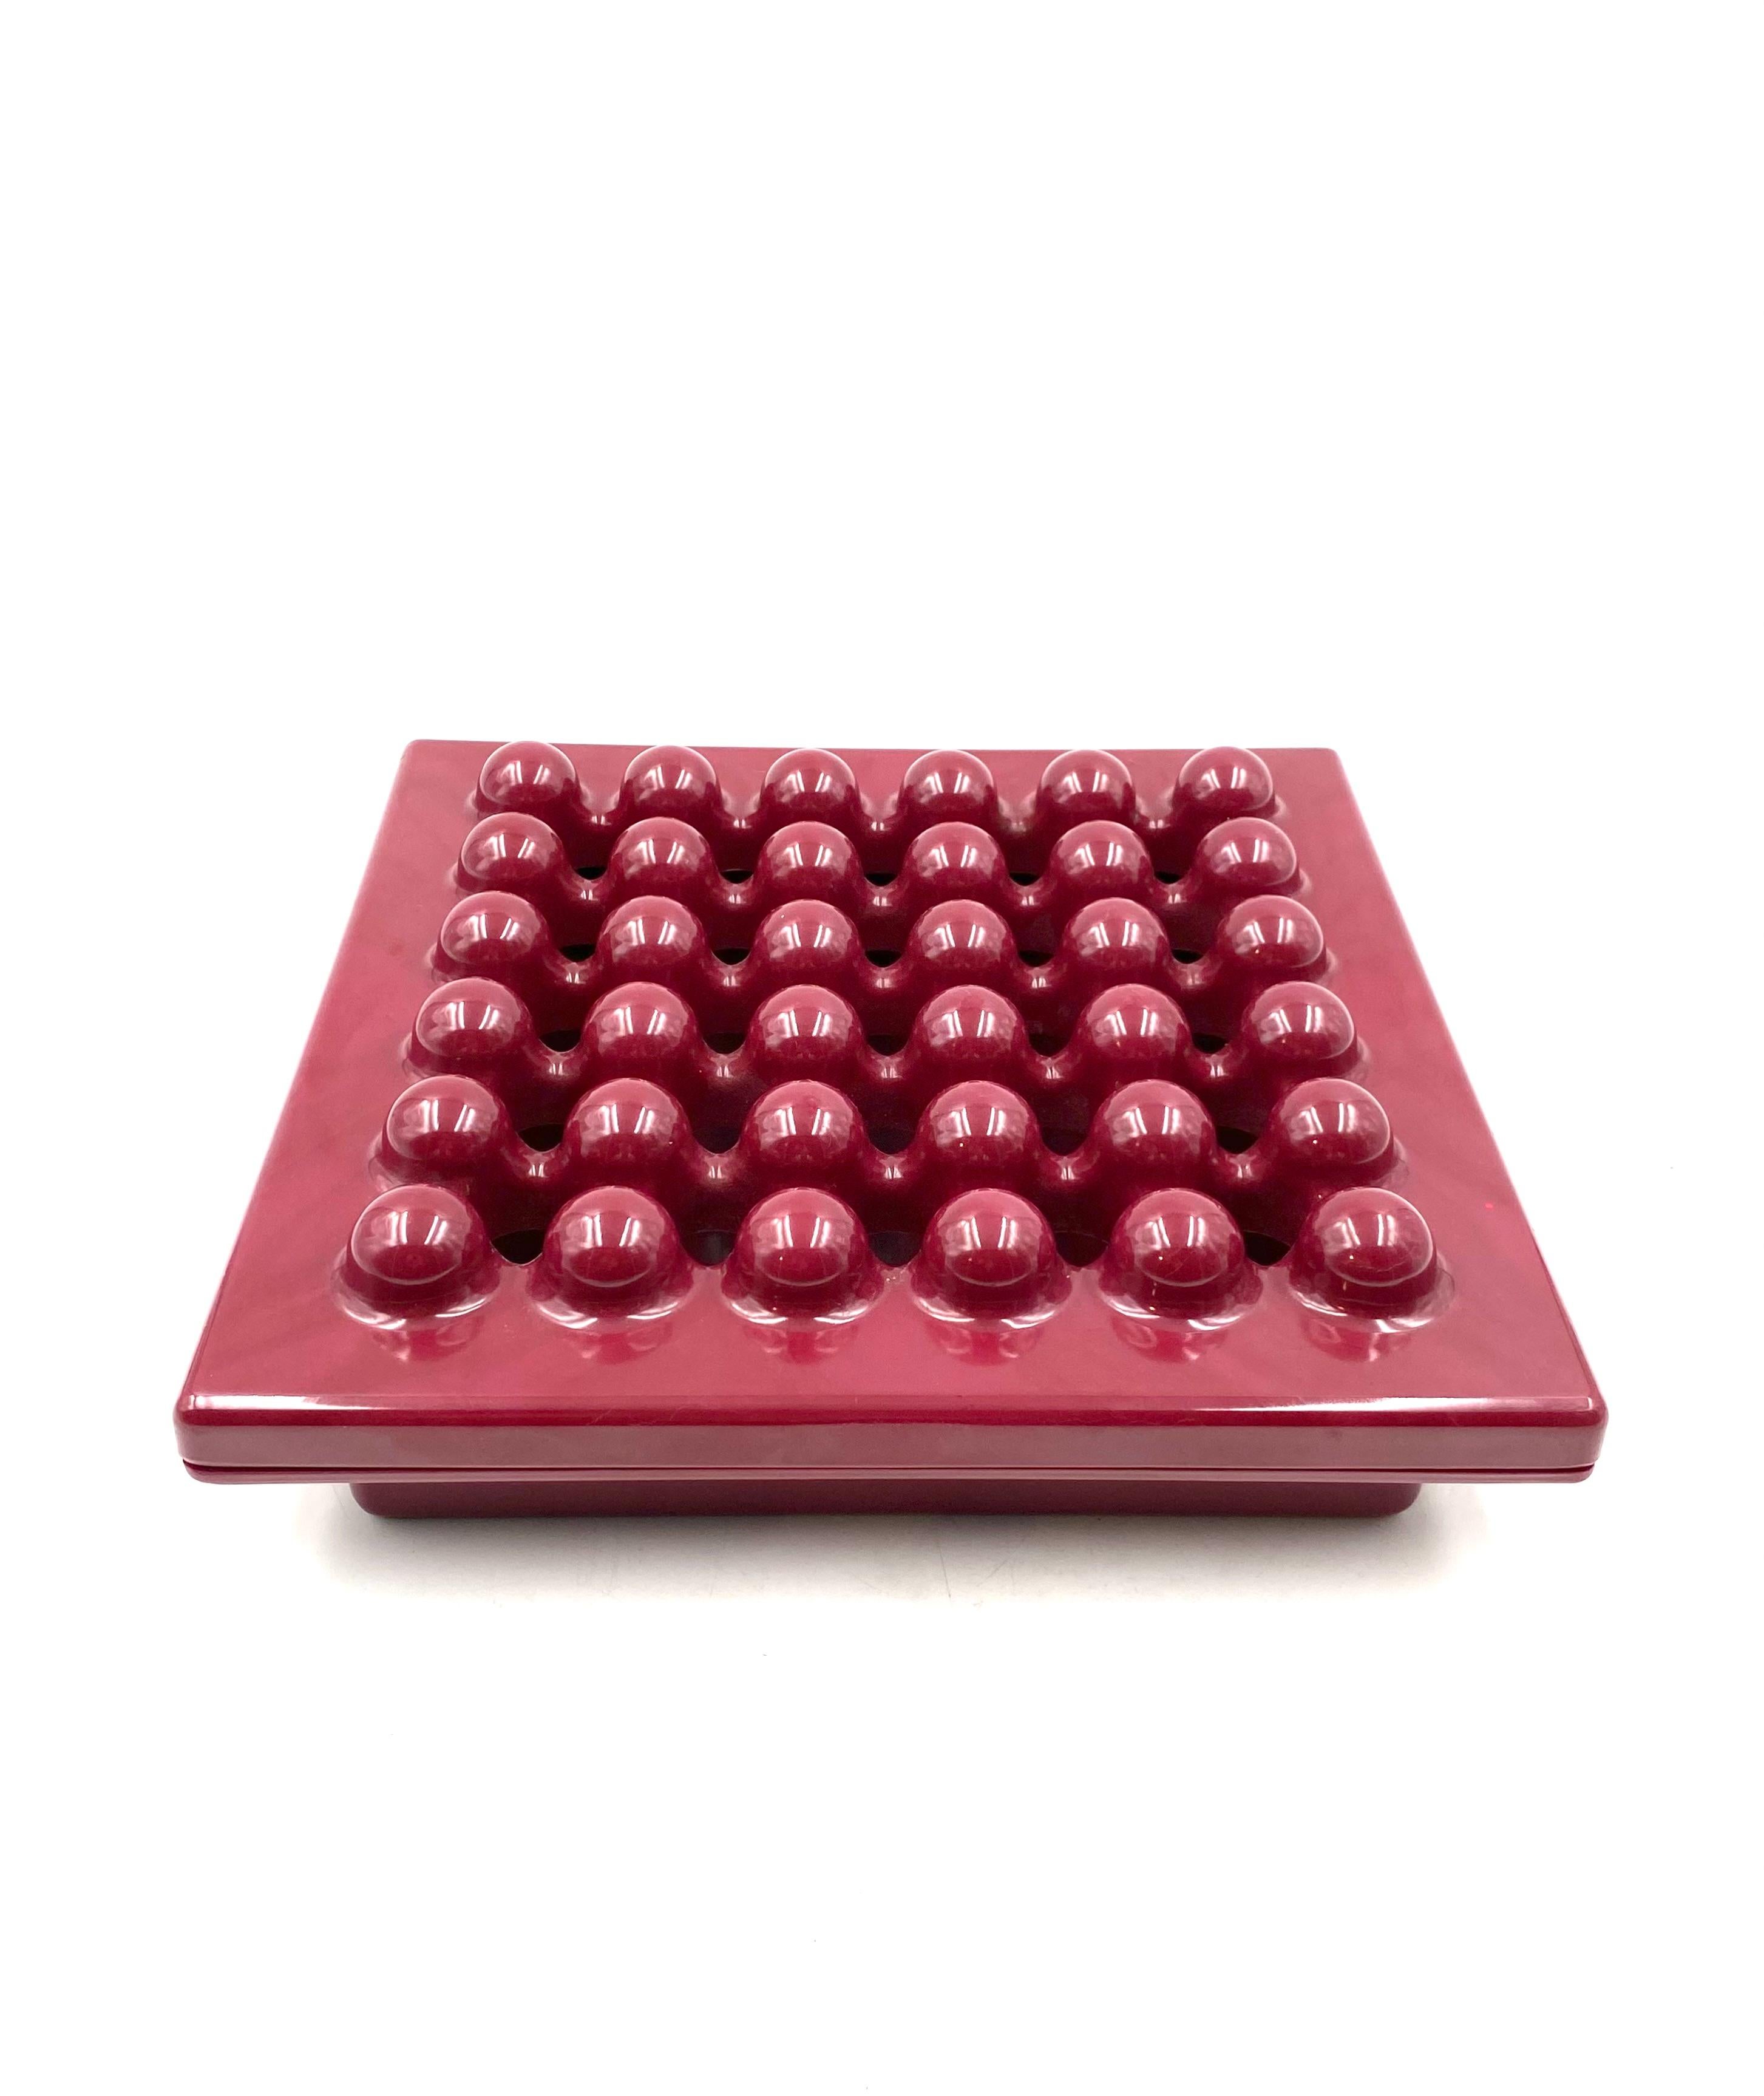 Ettore Sottsass, red big ashtray, Olivetti Synthesis, Sistema 45 series, 1971 For Sale 5